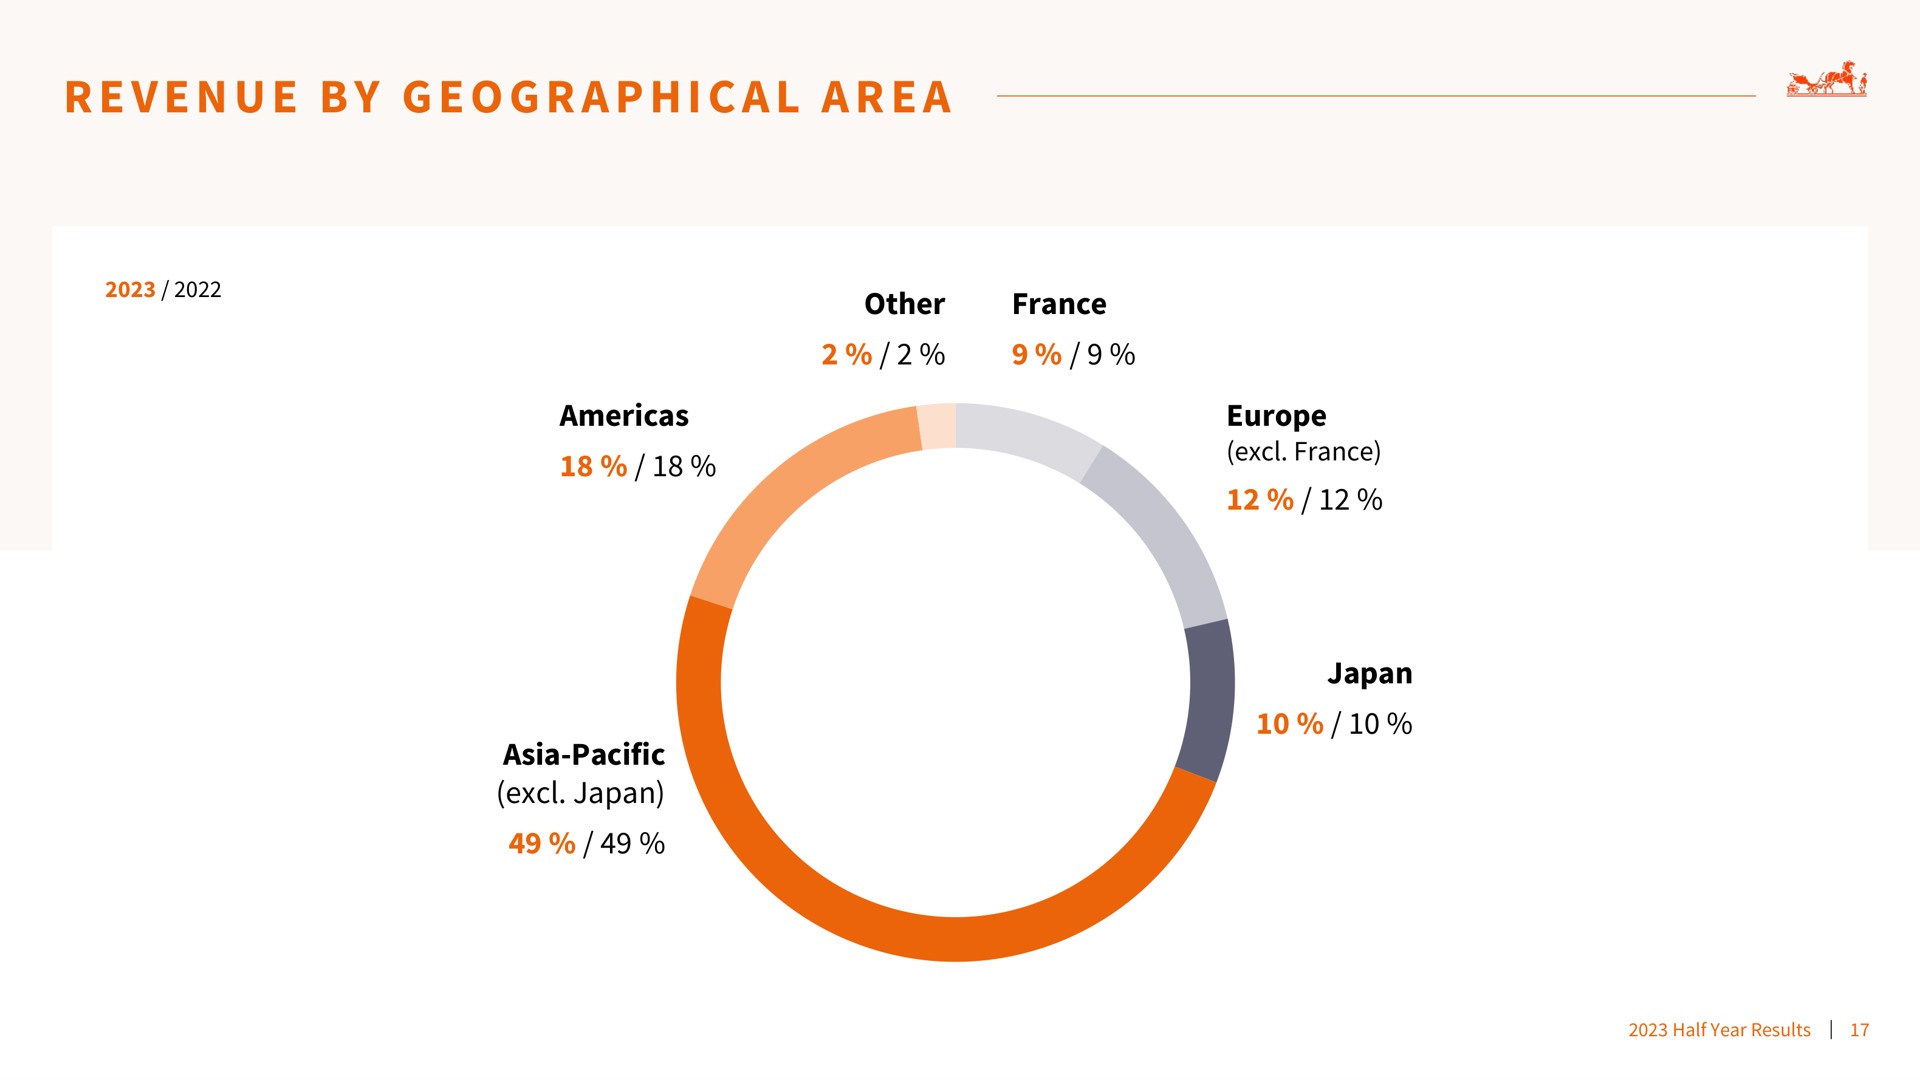 a i a a a revenue by geographical area | Hermes